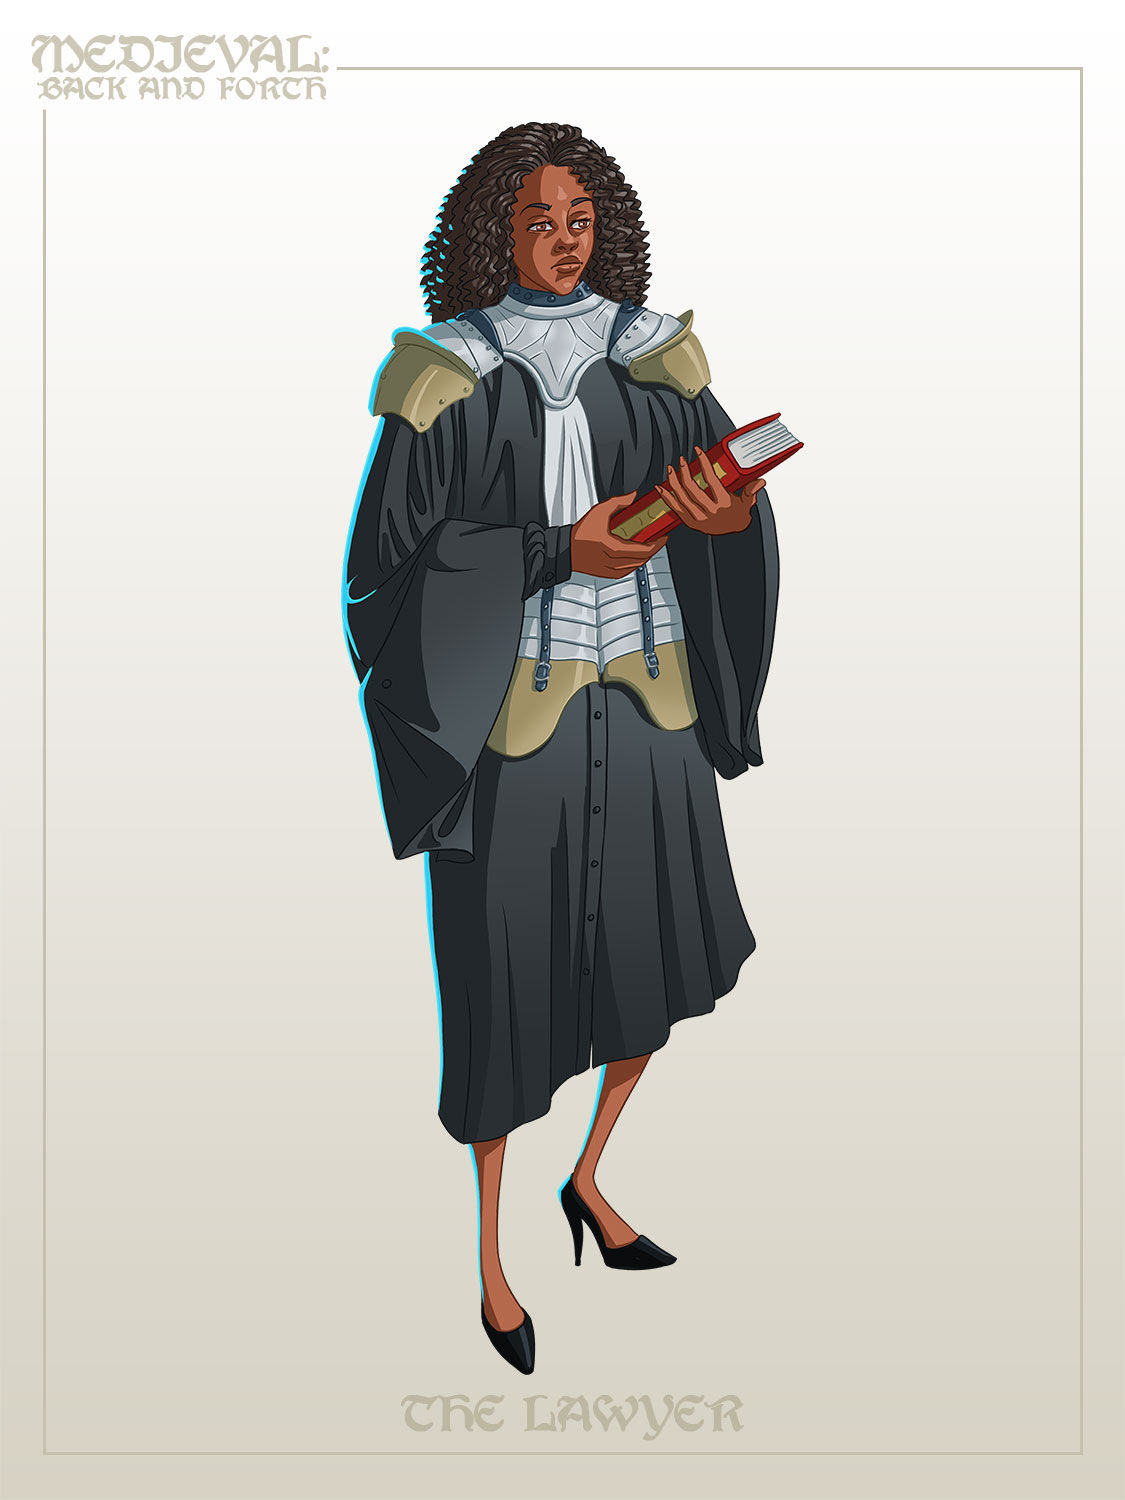 medieval back and forth lawyer jean buchet